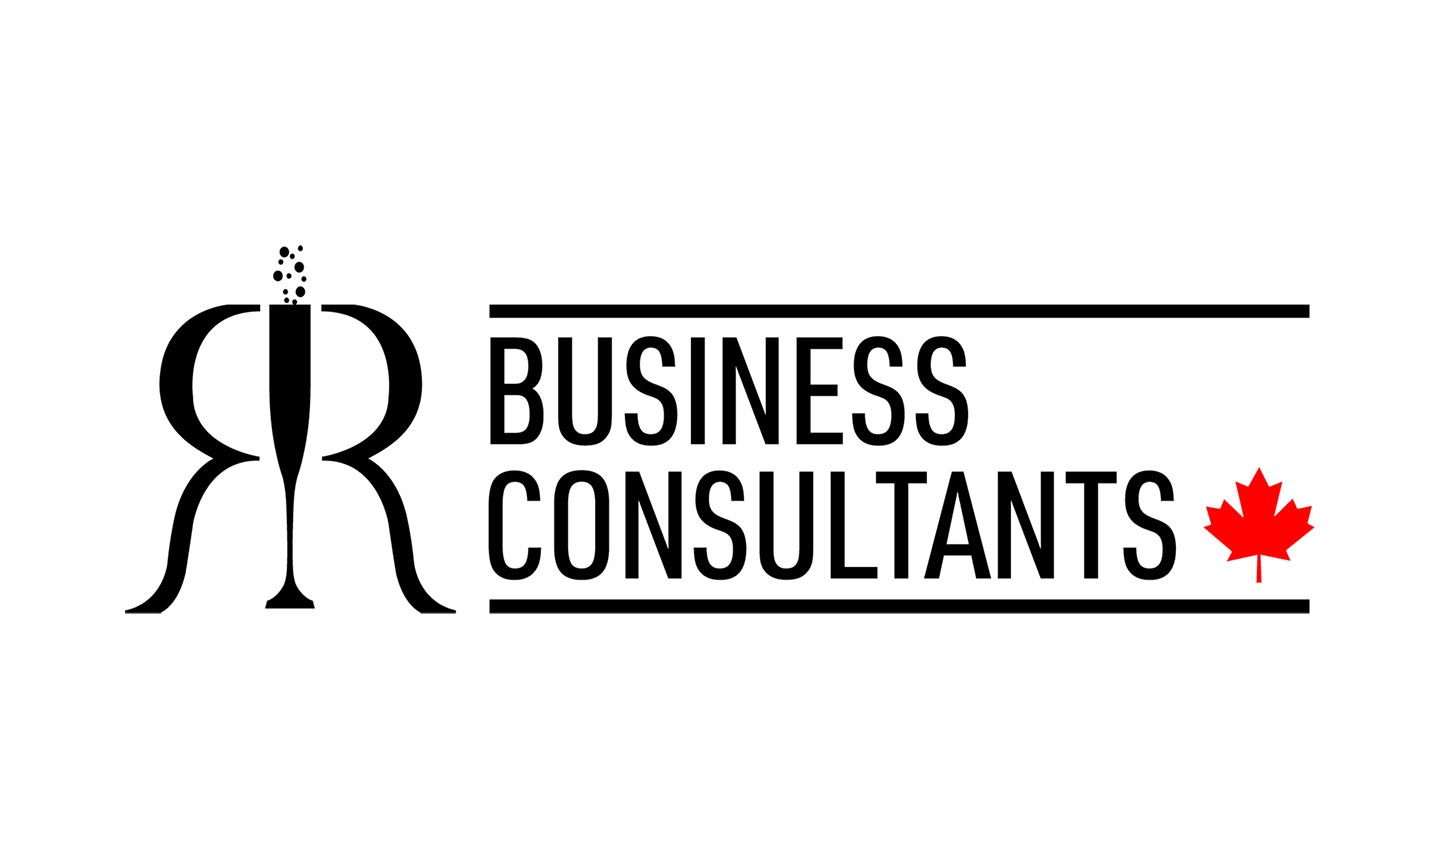 R&R Business Consultants